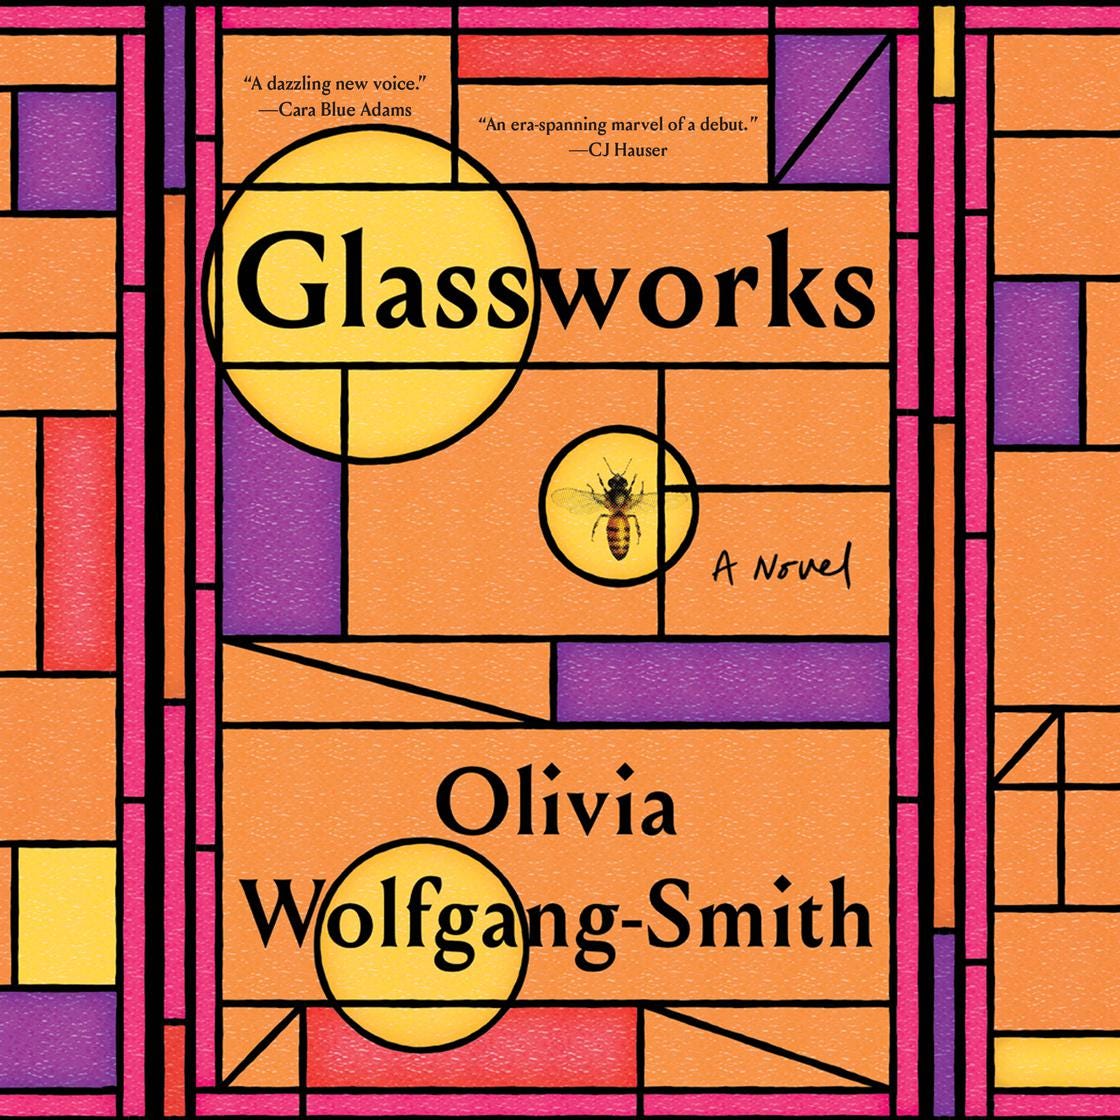 Cover of the audiobook of Glassworks: an abstract, geometric, stained-glass pattern in shades of orange, red, yellow, and pink. 